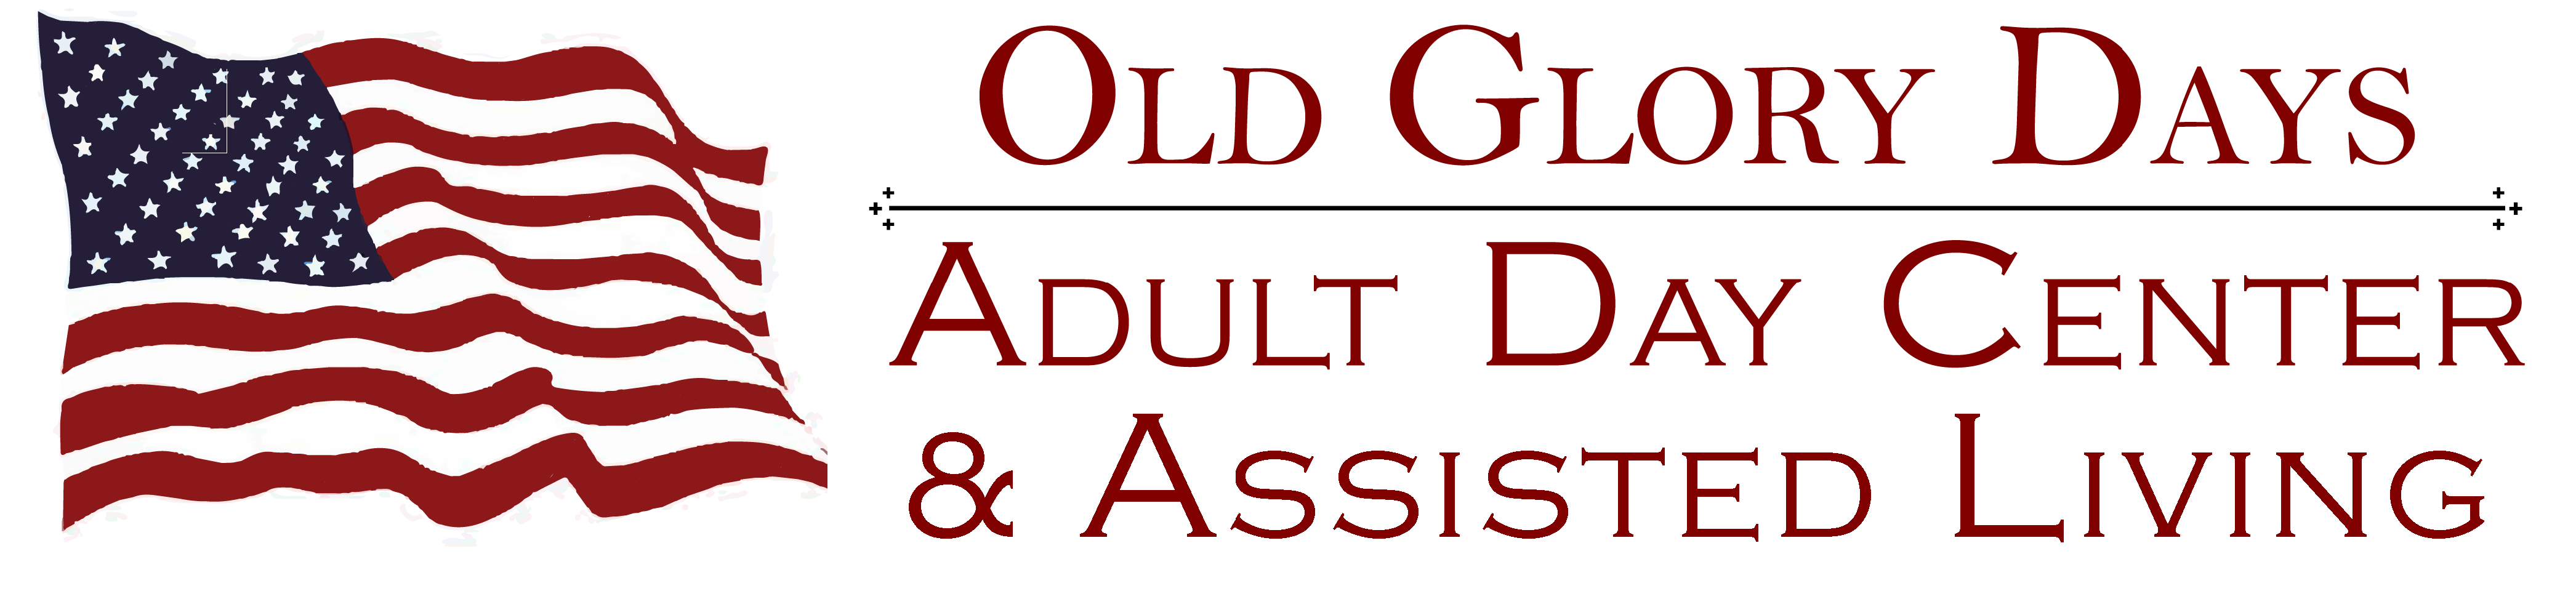 Old Glory Days Adult Day Center & Assisted Living